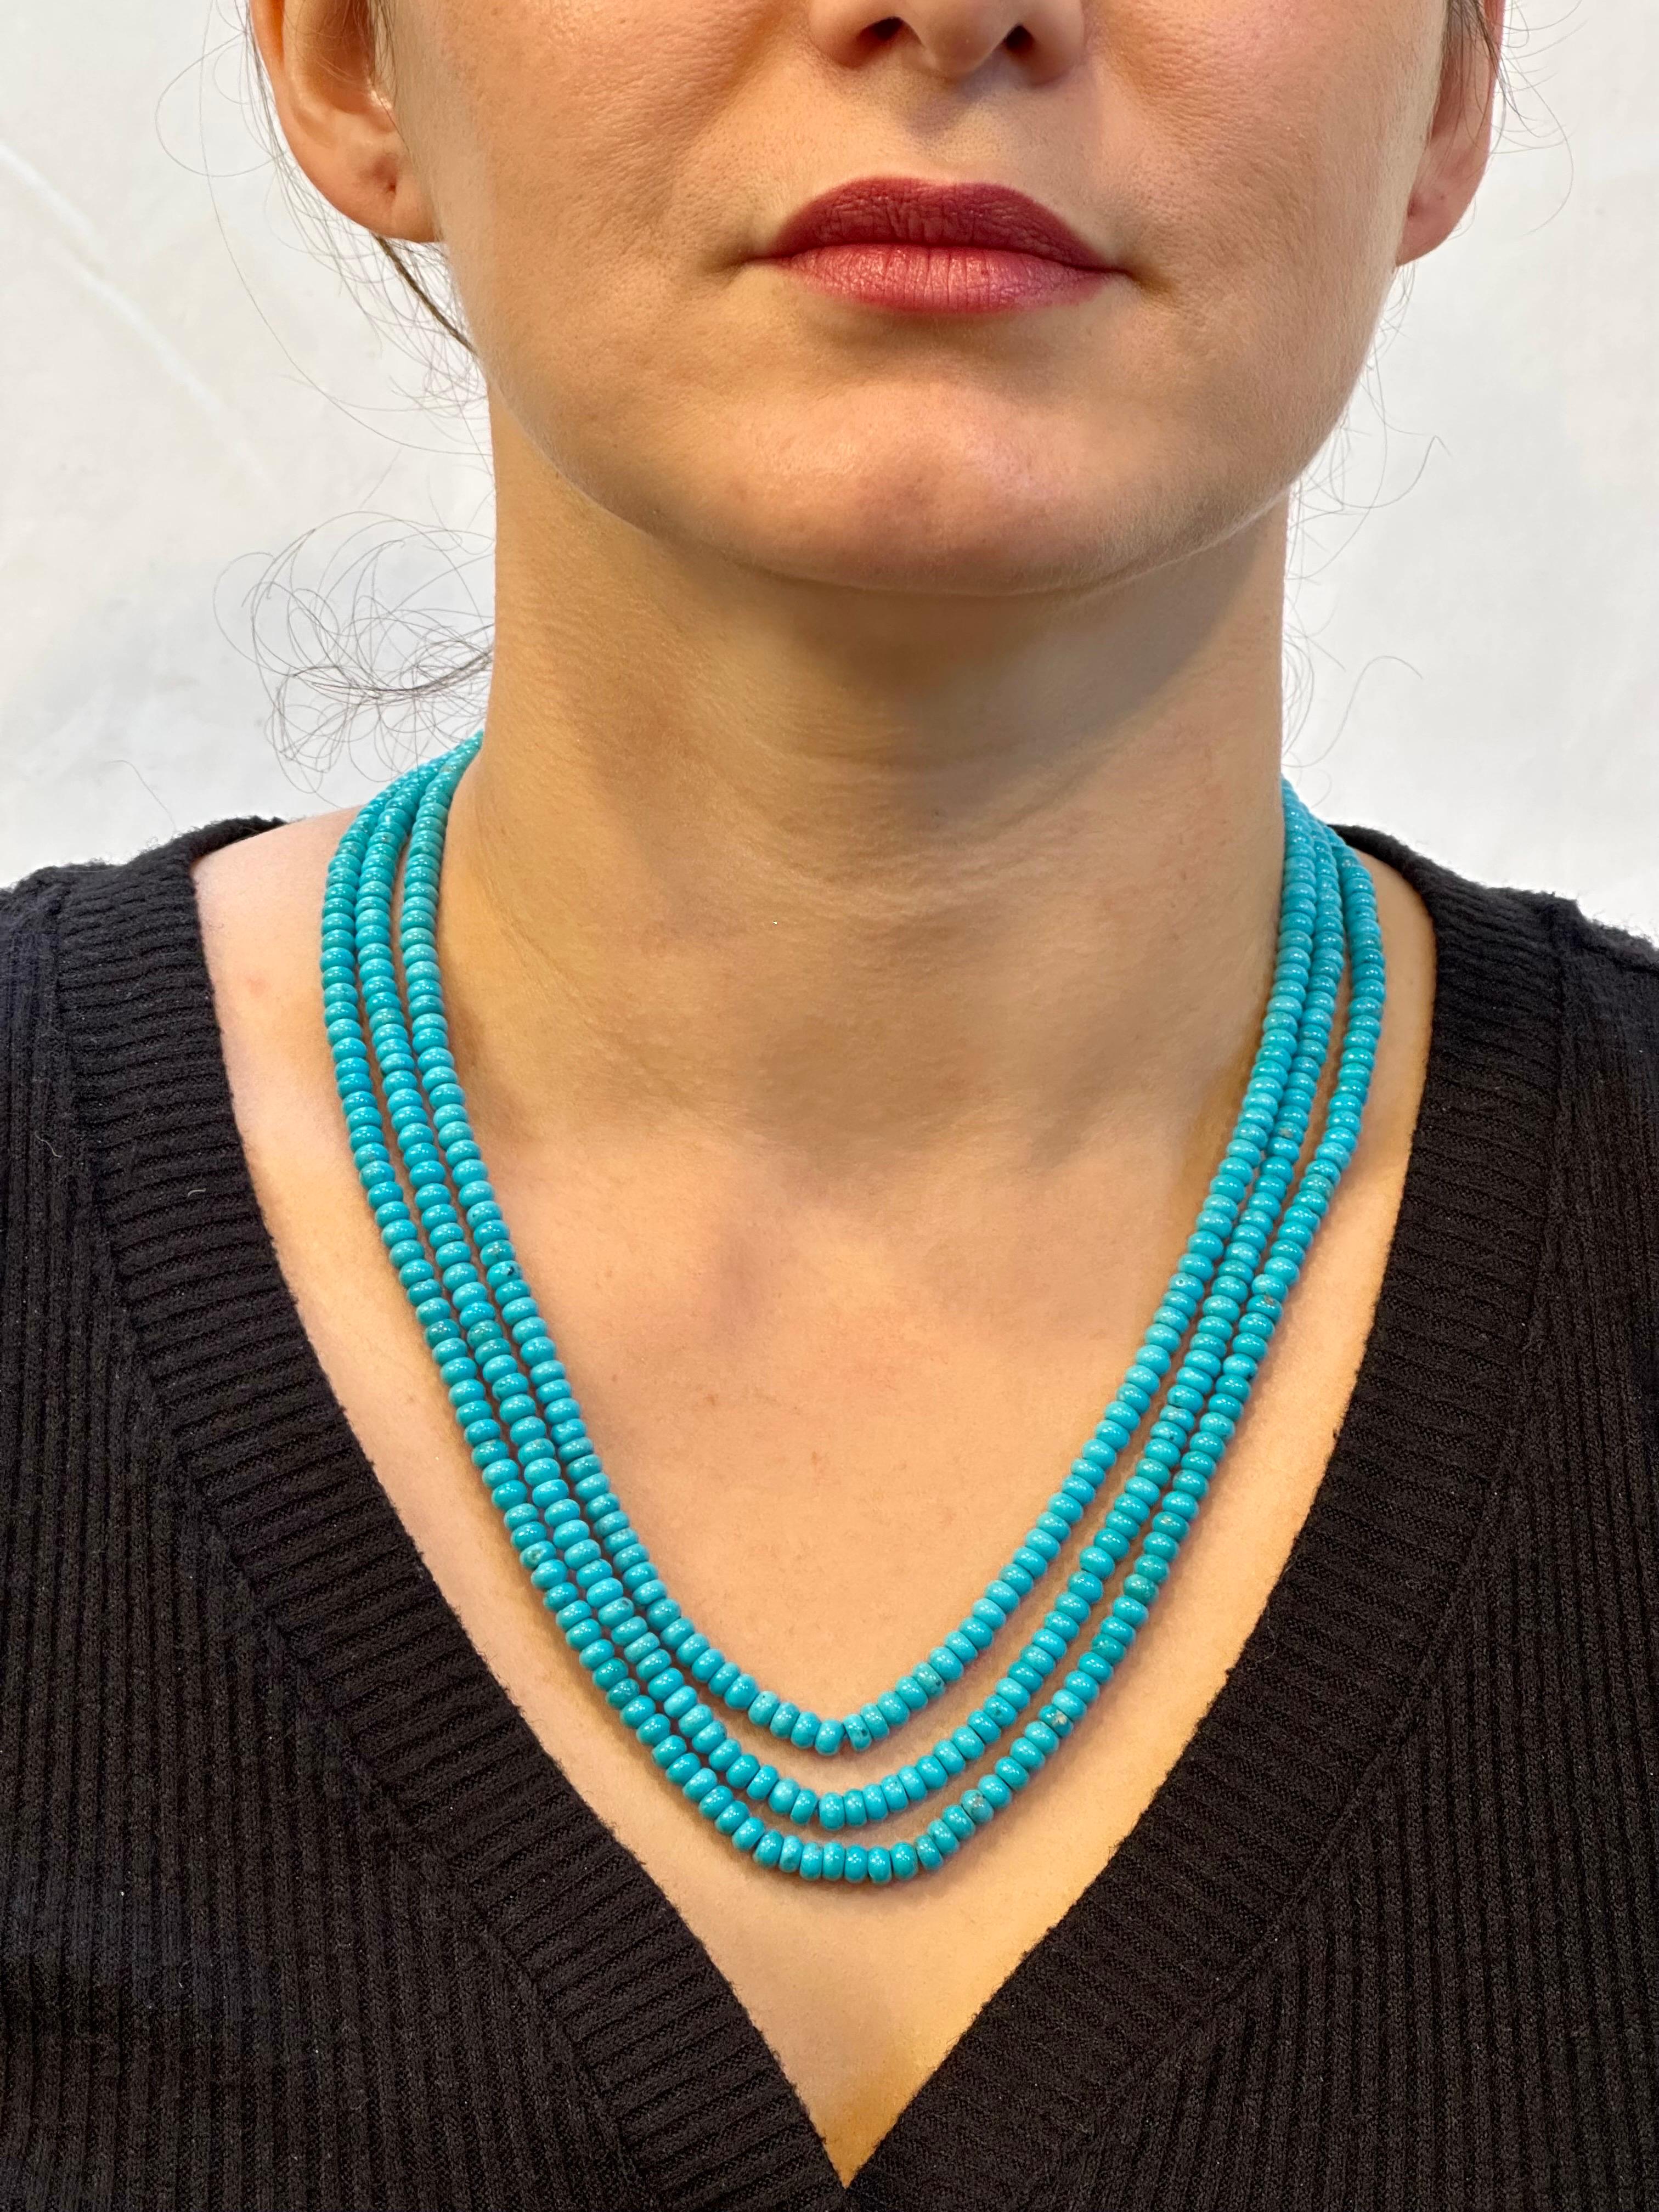 345 Carat Natural Sleeping Beauty Turquoise Necklace, Four Strand 14 Karat Gold For Sale 5